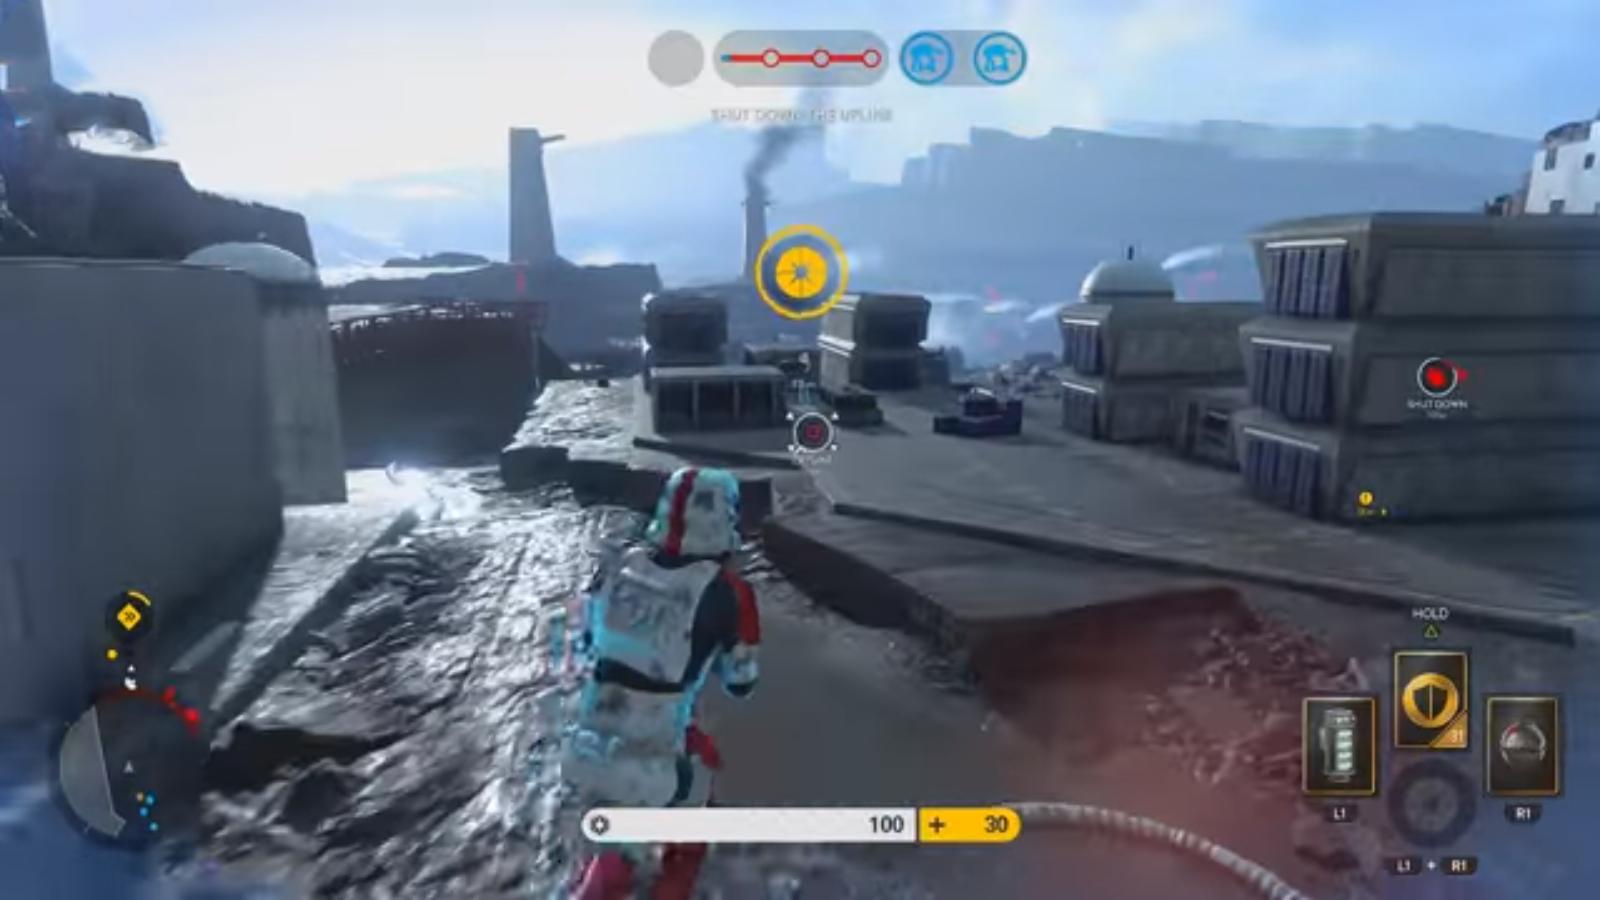 Tricks Star Wars Battlefront For Android Apk Download - roblox lightsaber game roblox hack on android